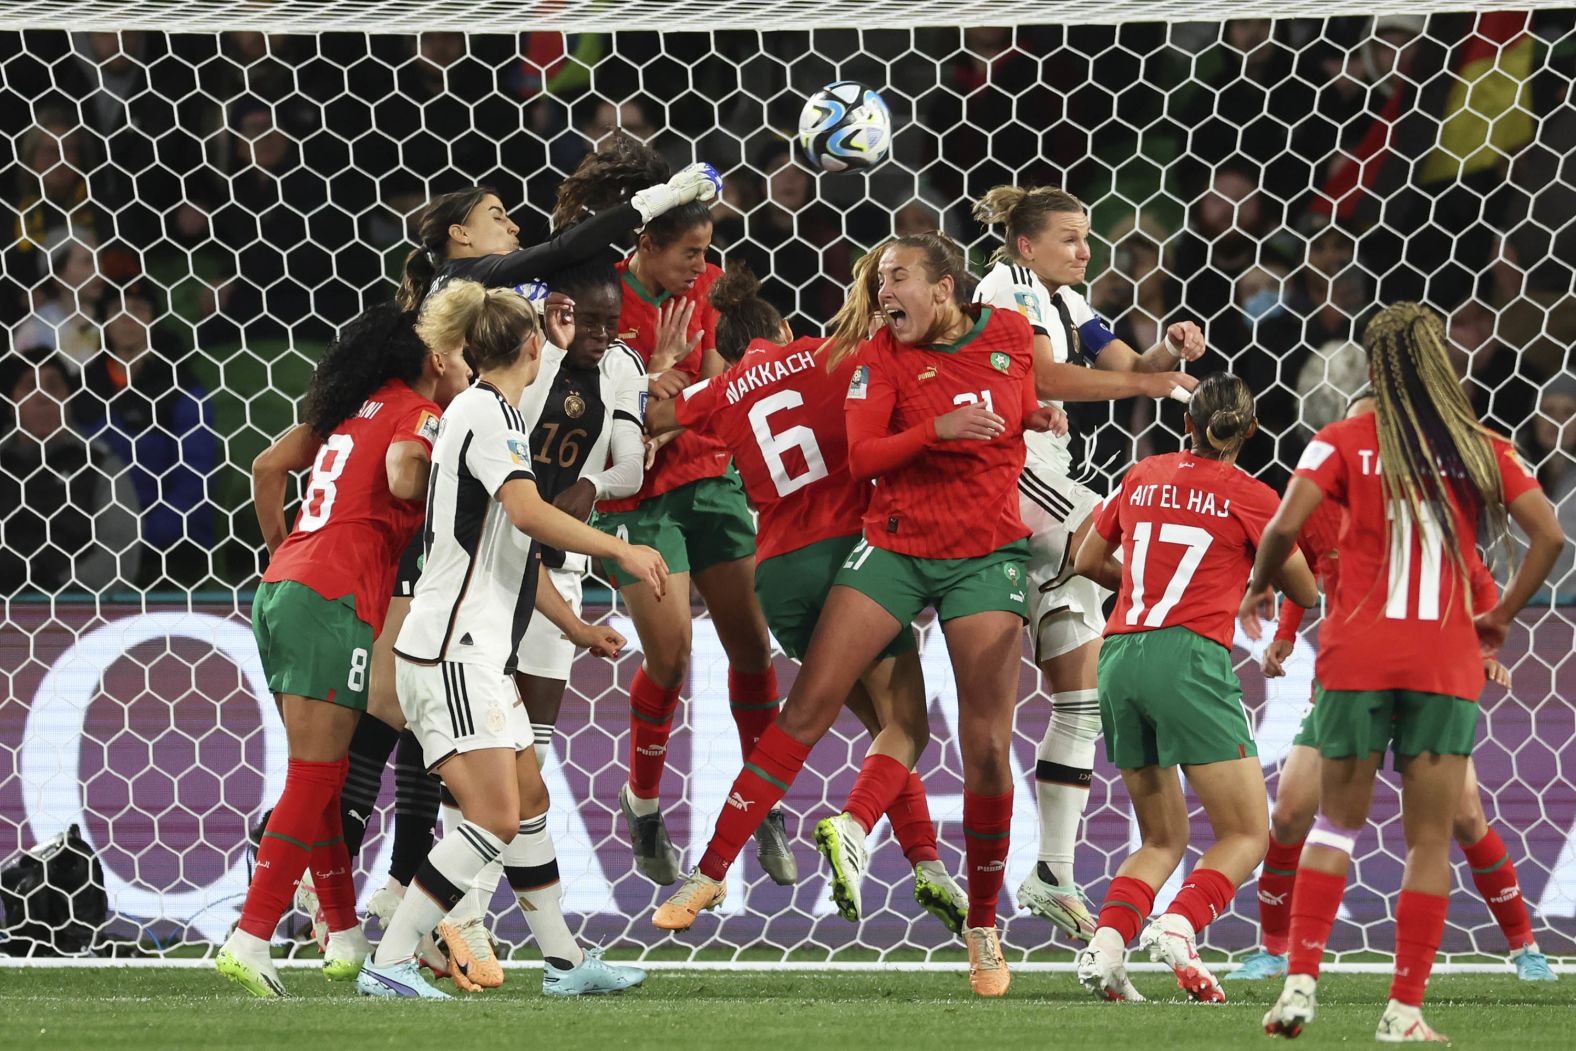 Moroccan goalkeeper Khadija Er-Rmichi tries to punch the ball away during a match against Germany on July 24. <a href="index.php?page=&url=https%3A%2F%2Fedition.cnn.com%2F2023%2F07%2F23%2Ffootball%2Fbrazil-germany-panama-morocco-womens-world-cup-2023-spt-intl%2Findex.html" target="_blank">Germany dominated Morocco 6-0</a> in what was the biggest scoreline of the tournament so far.